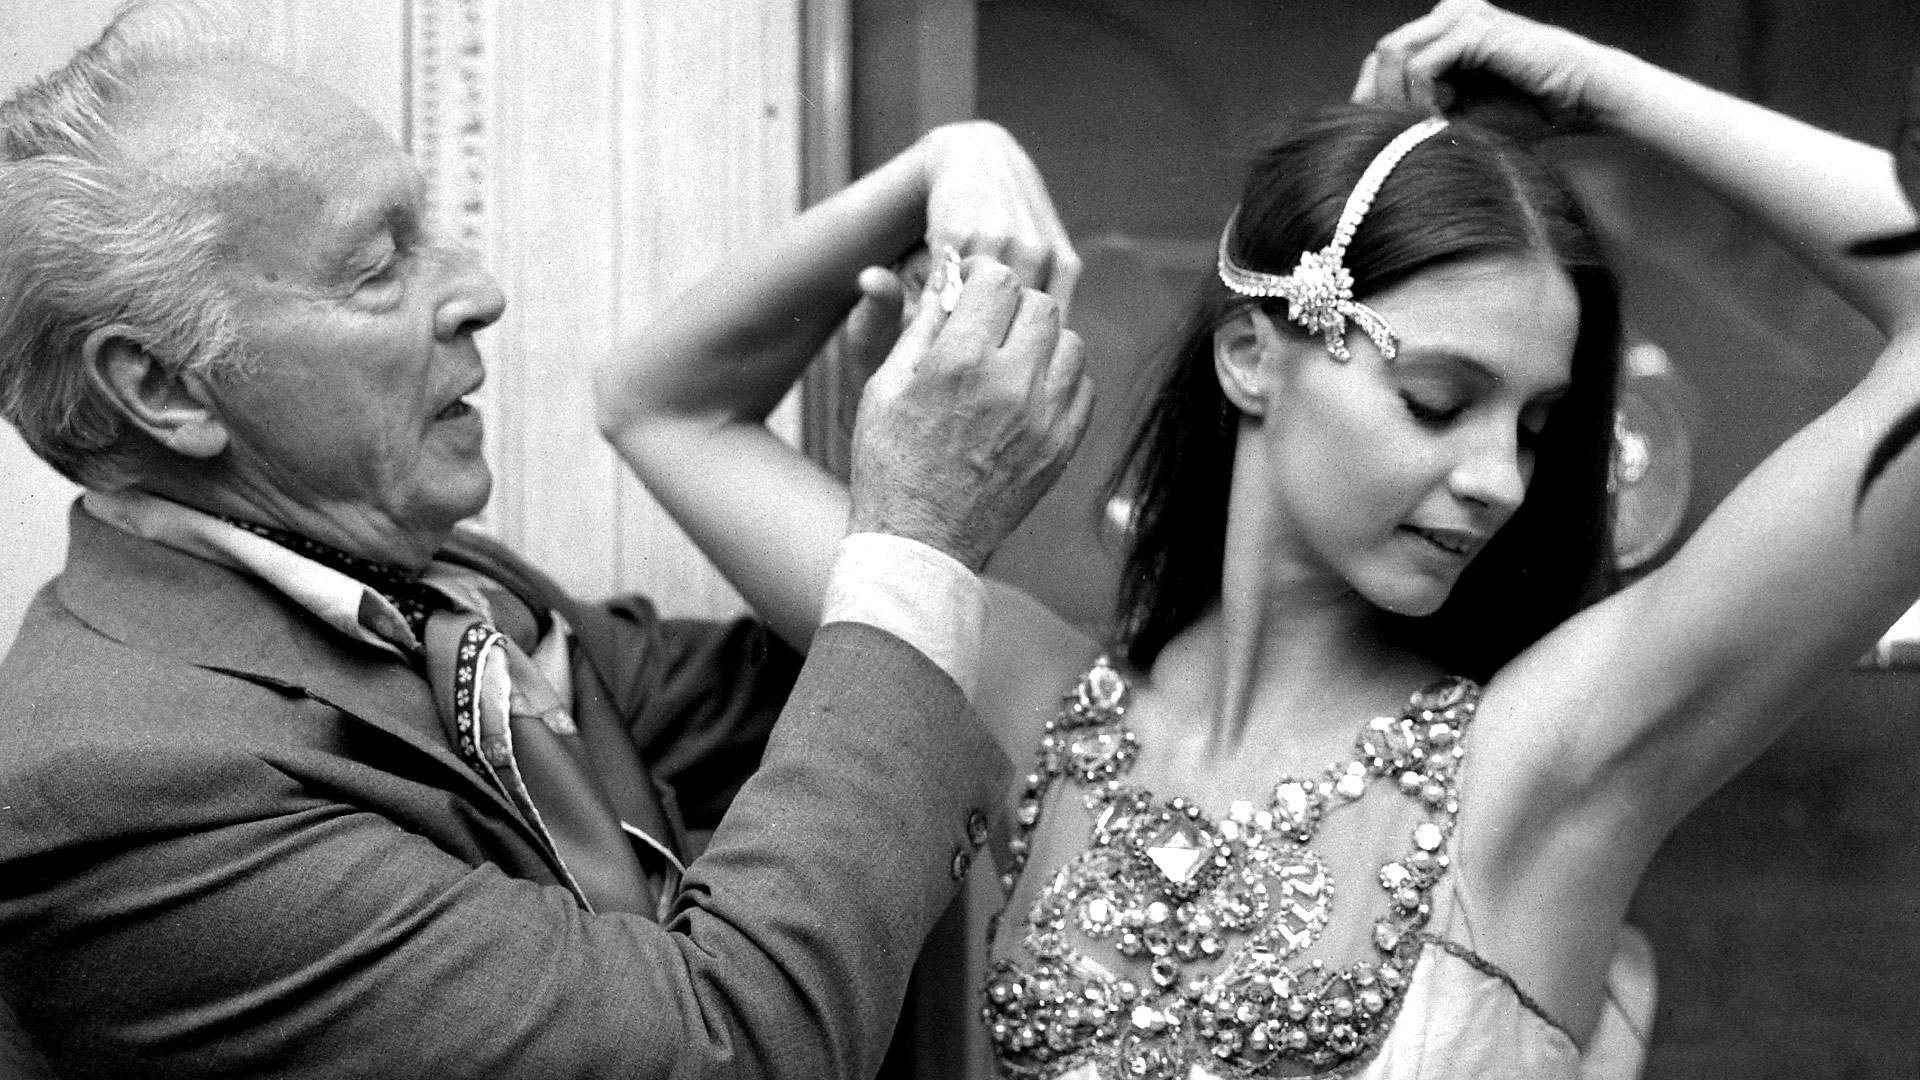 George Balanchine and dancer Suzanne Farrell wearing Van Cleef and Arpels jewelry for Balanchine's ballet 